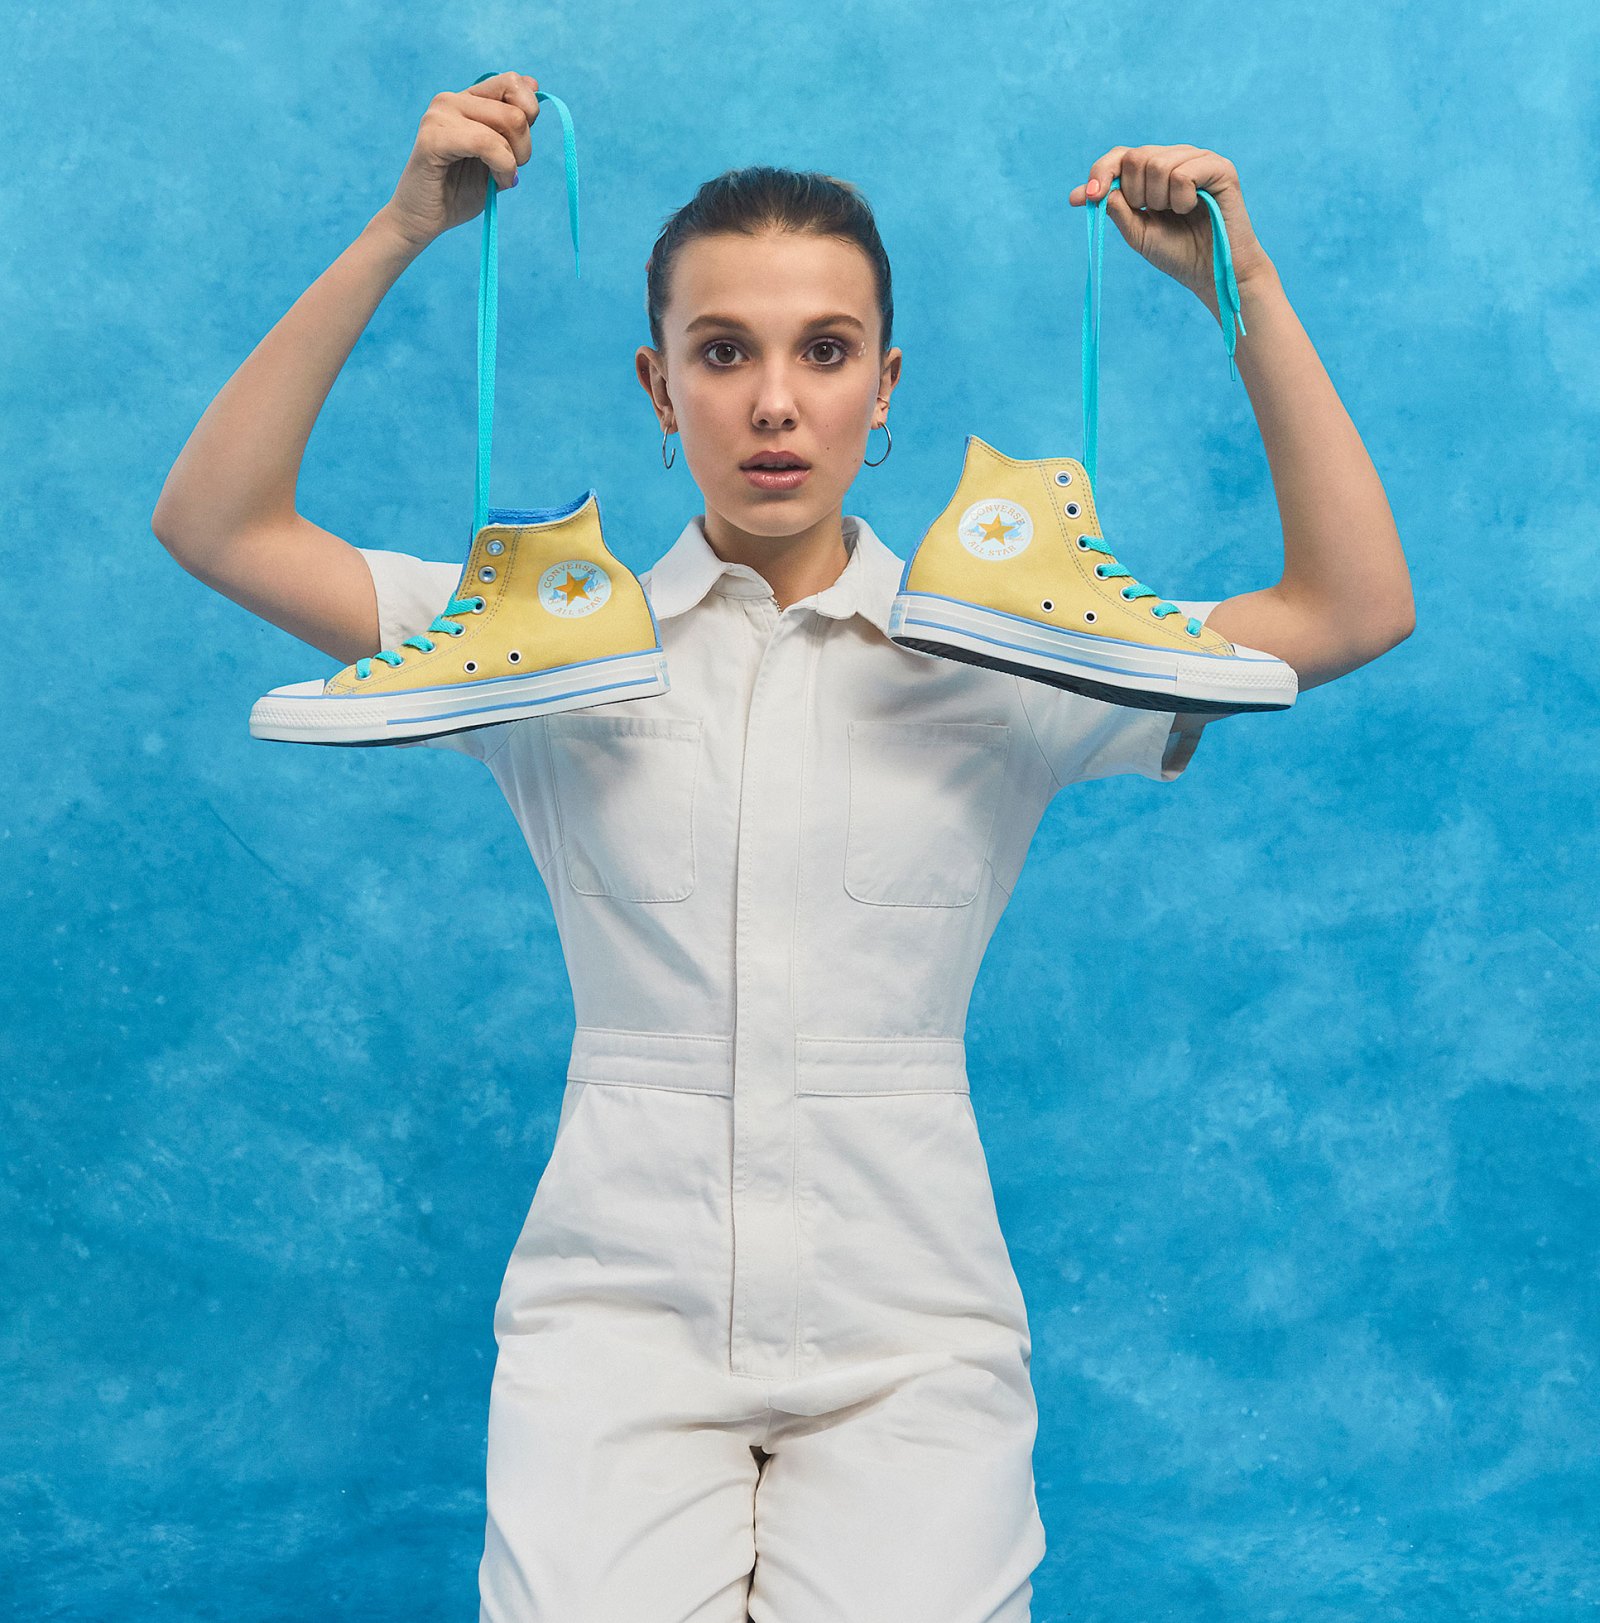 Millie Bobby Brown x Converse Collaboration: Custom Sneakers